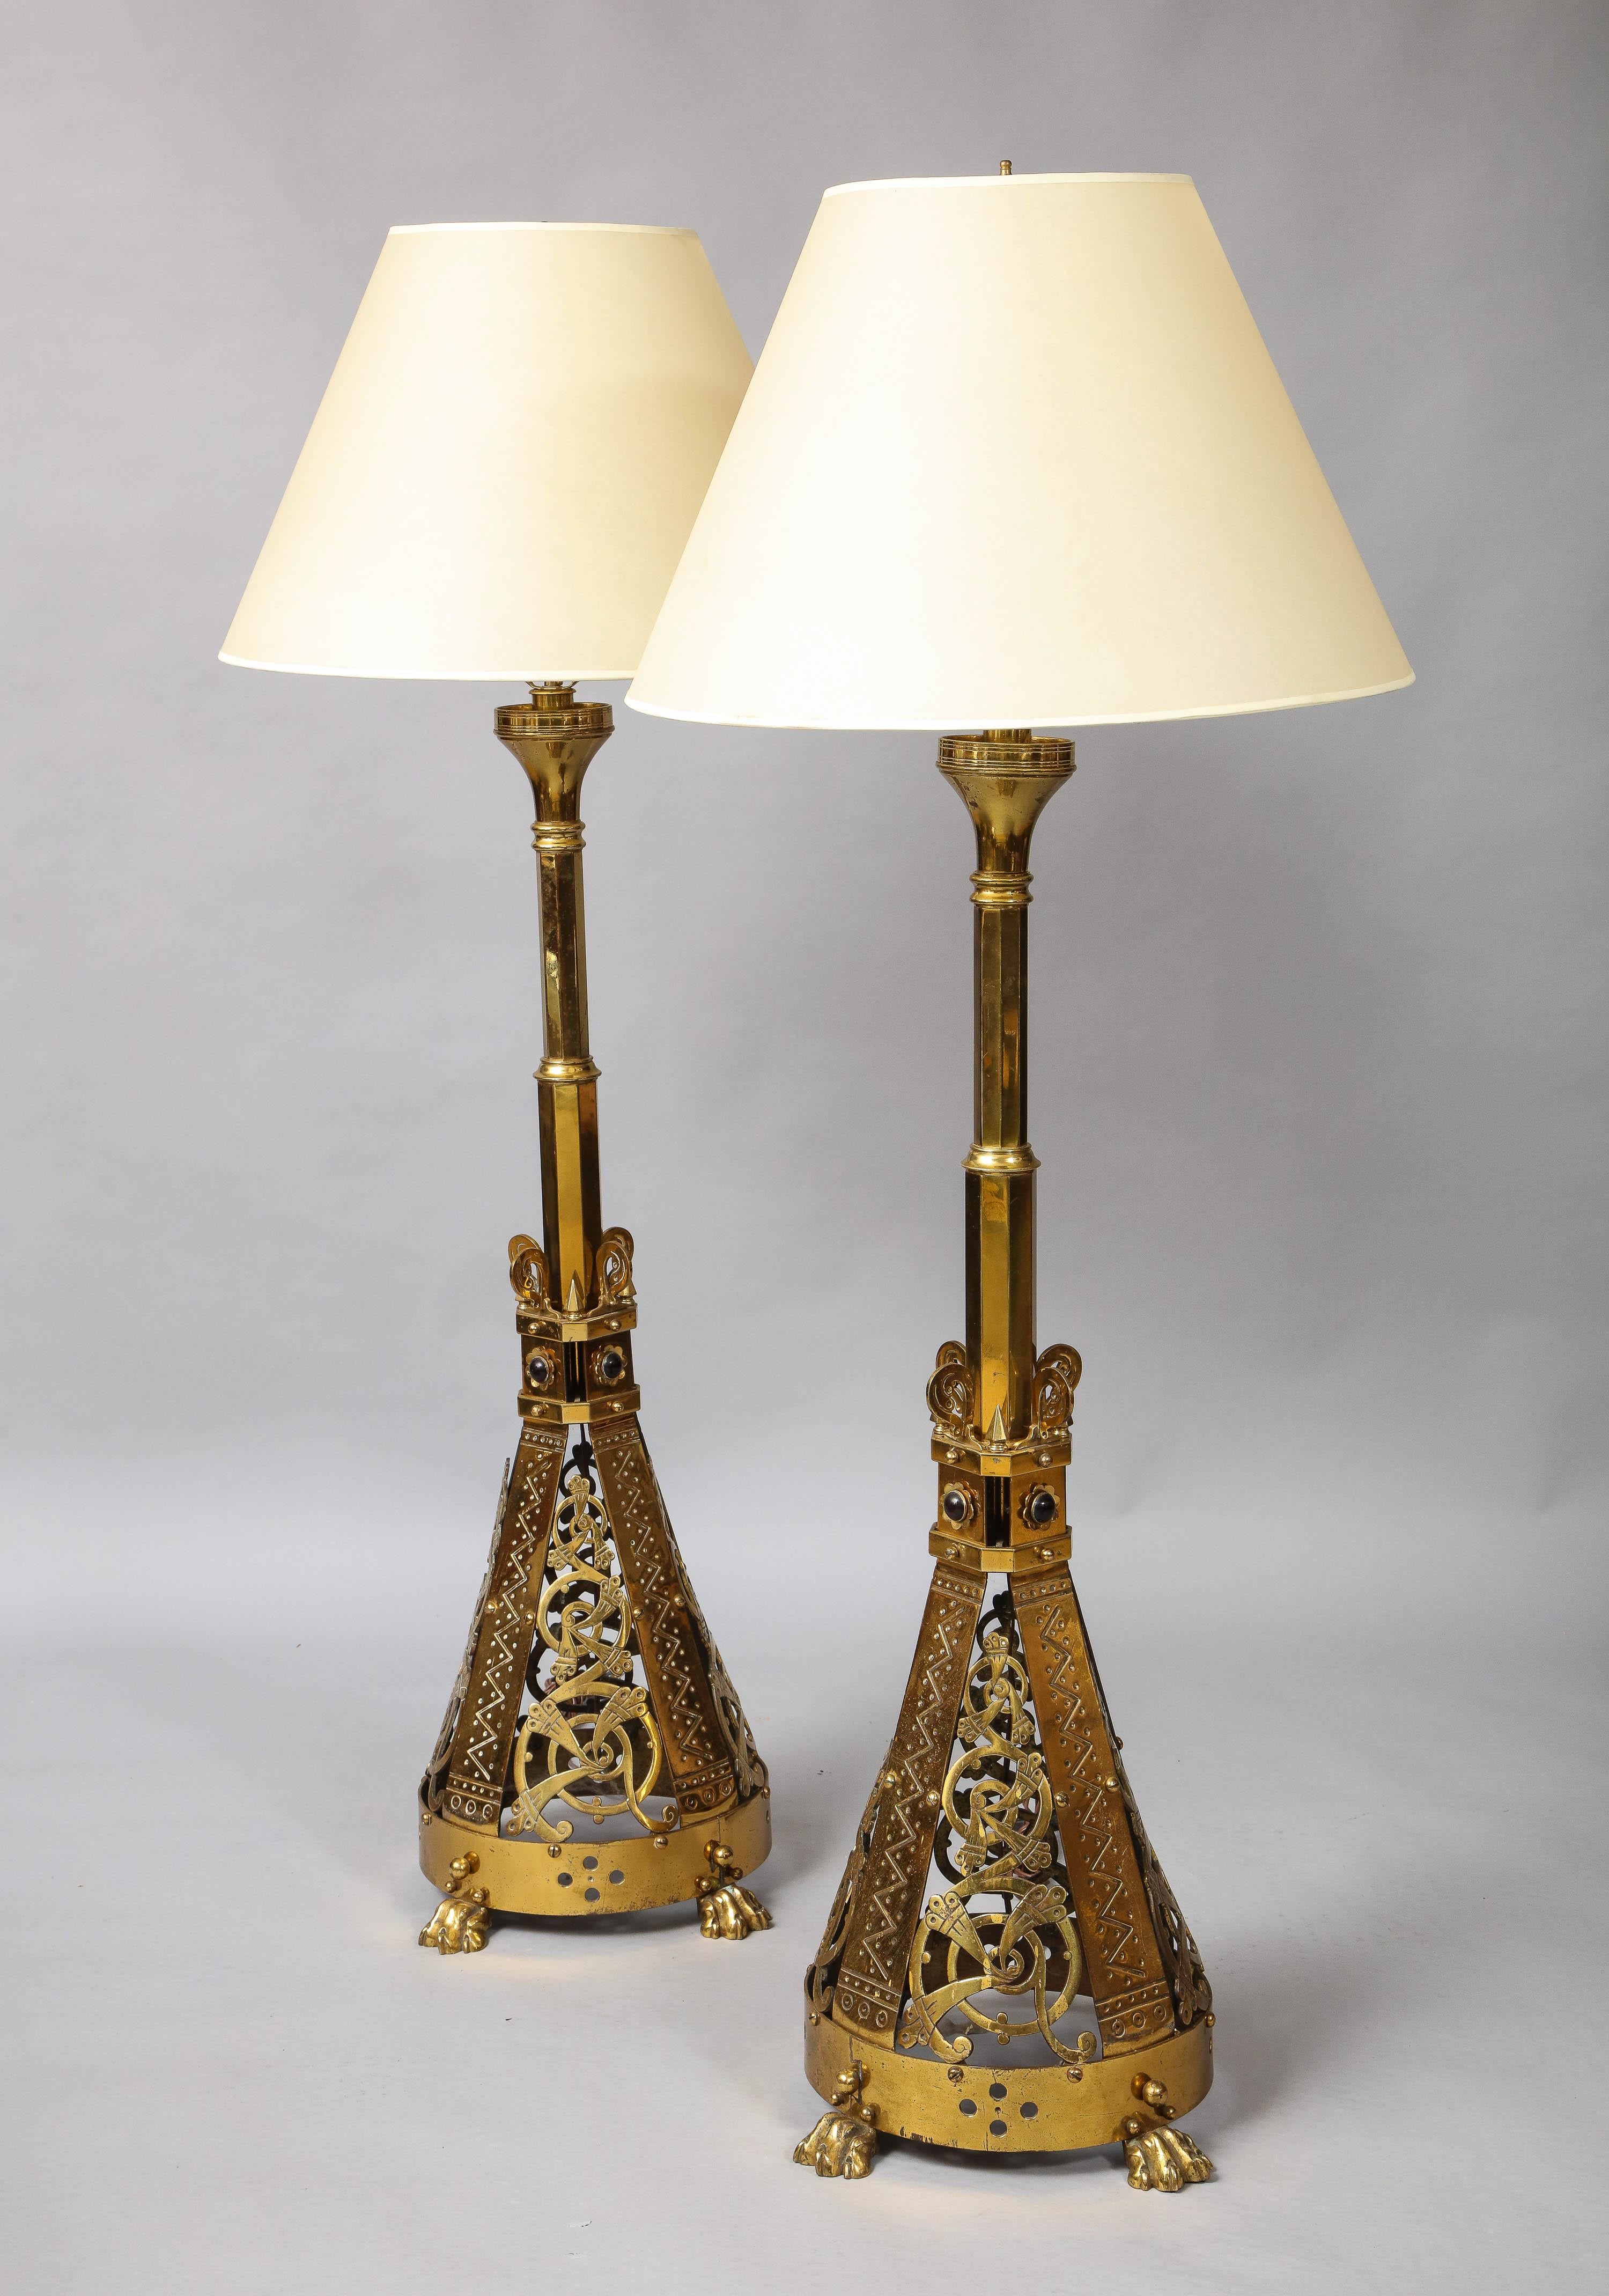 Fine pair of English mid-19th century Gothic Revival brass standard lamps, now electrified.

 